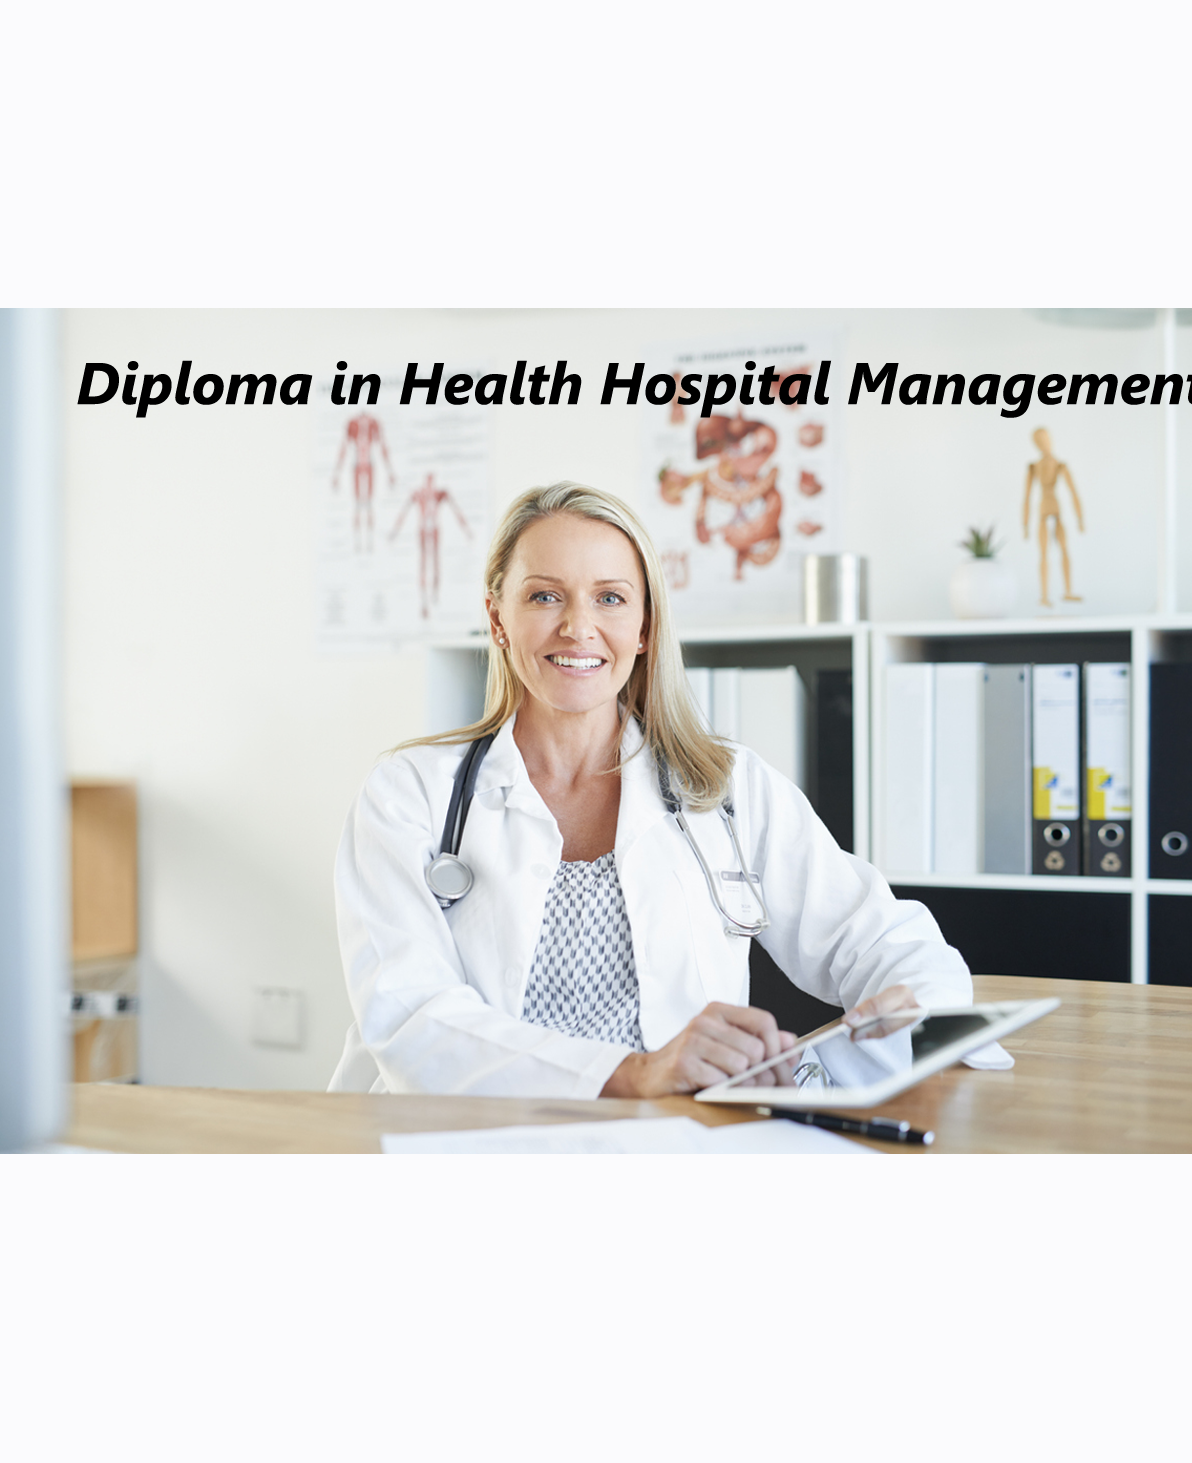 Diploma in Health Hospital Management